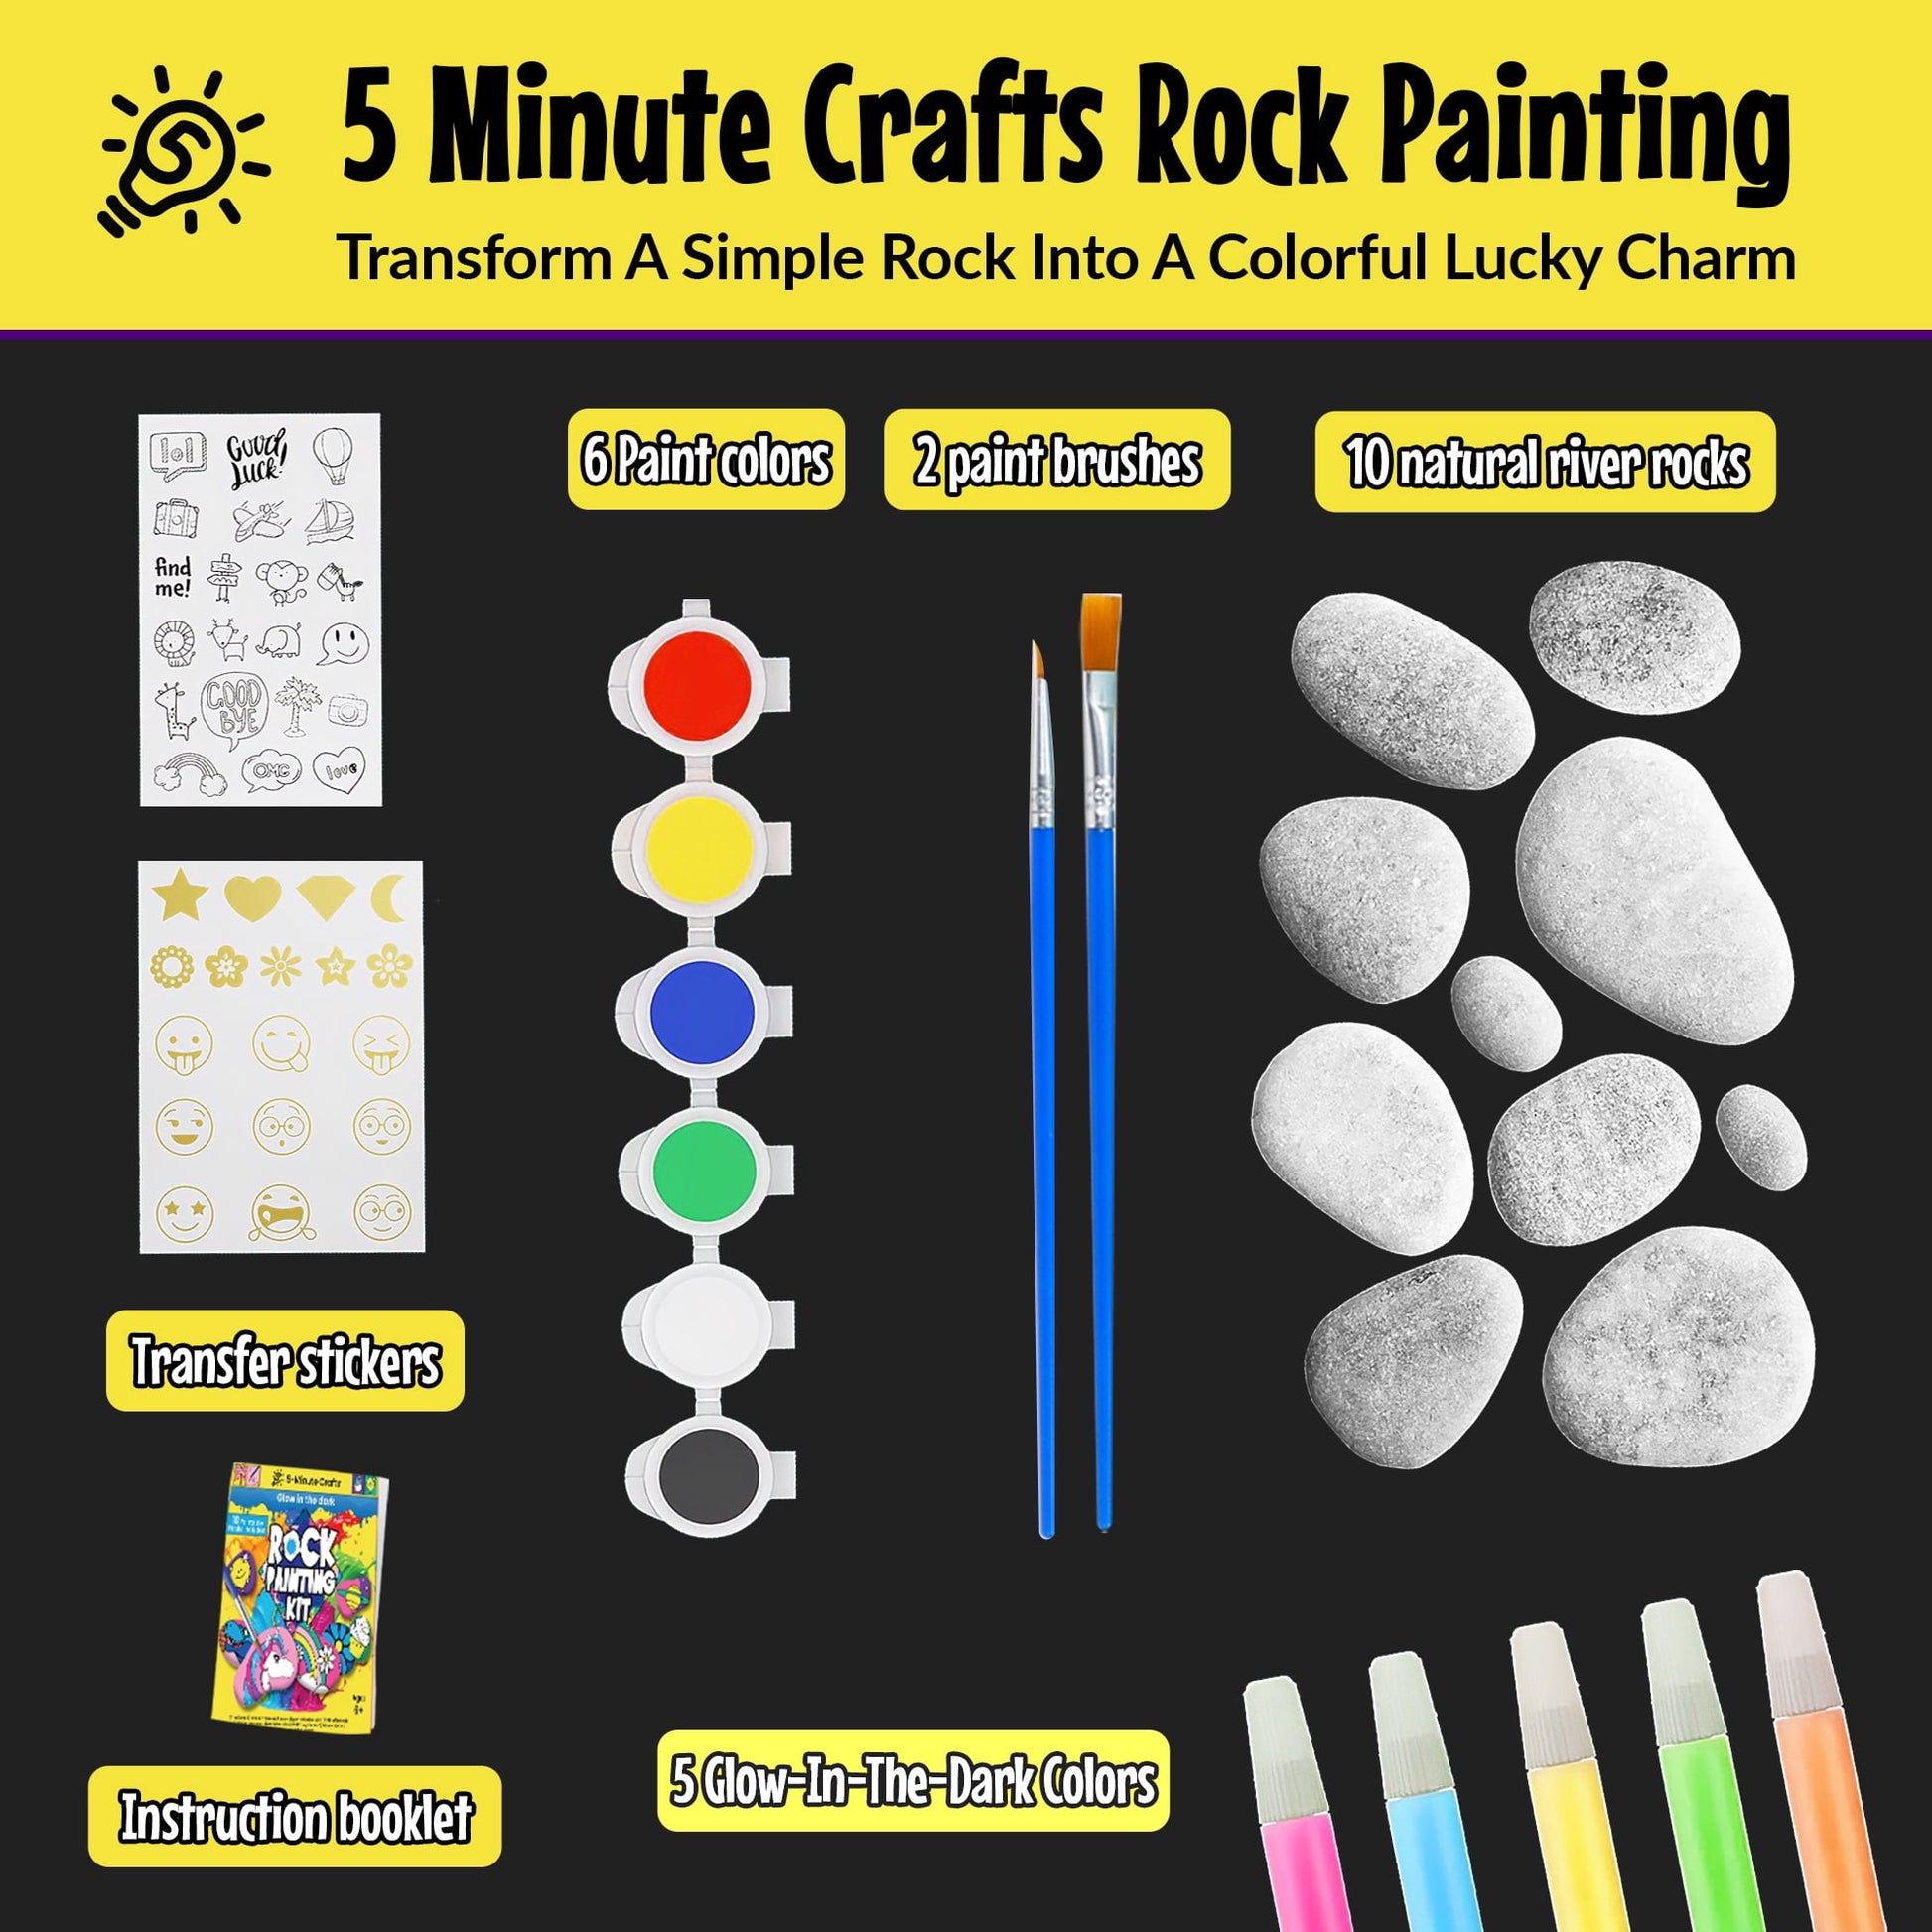 Creativity for Kids Glow In The Dark Rock Painting Kit - Paint 10 Rocks  with Wat